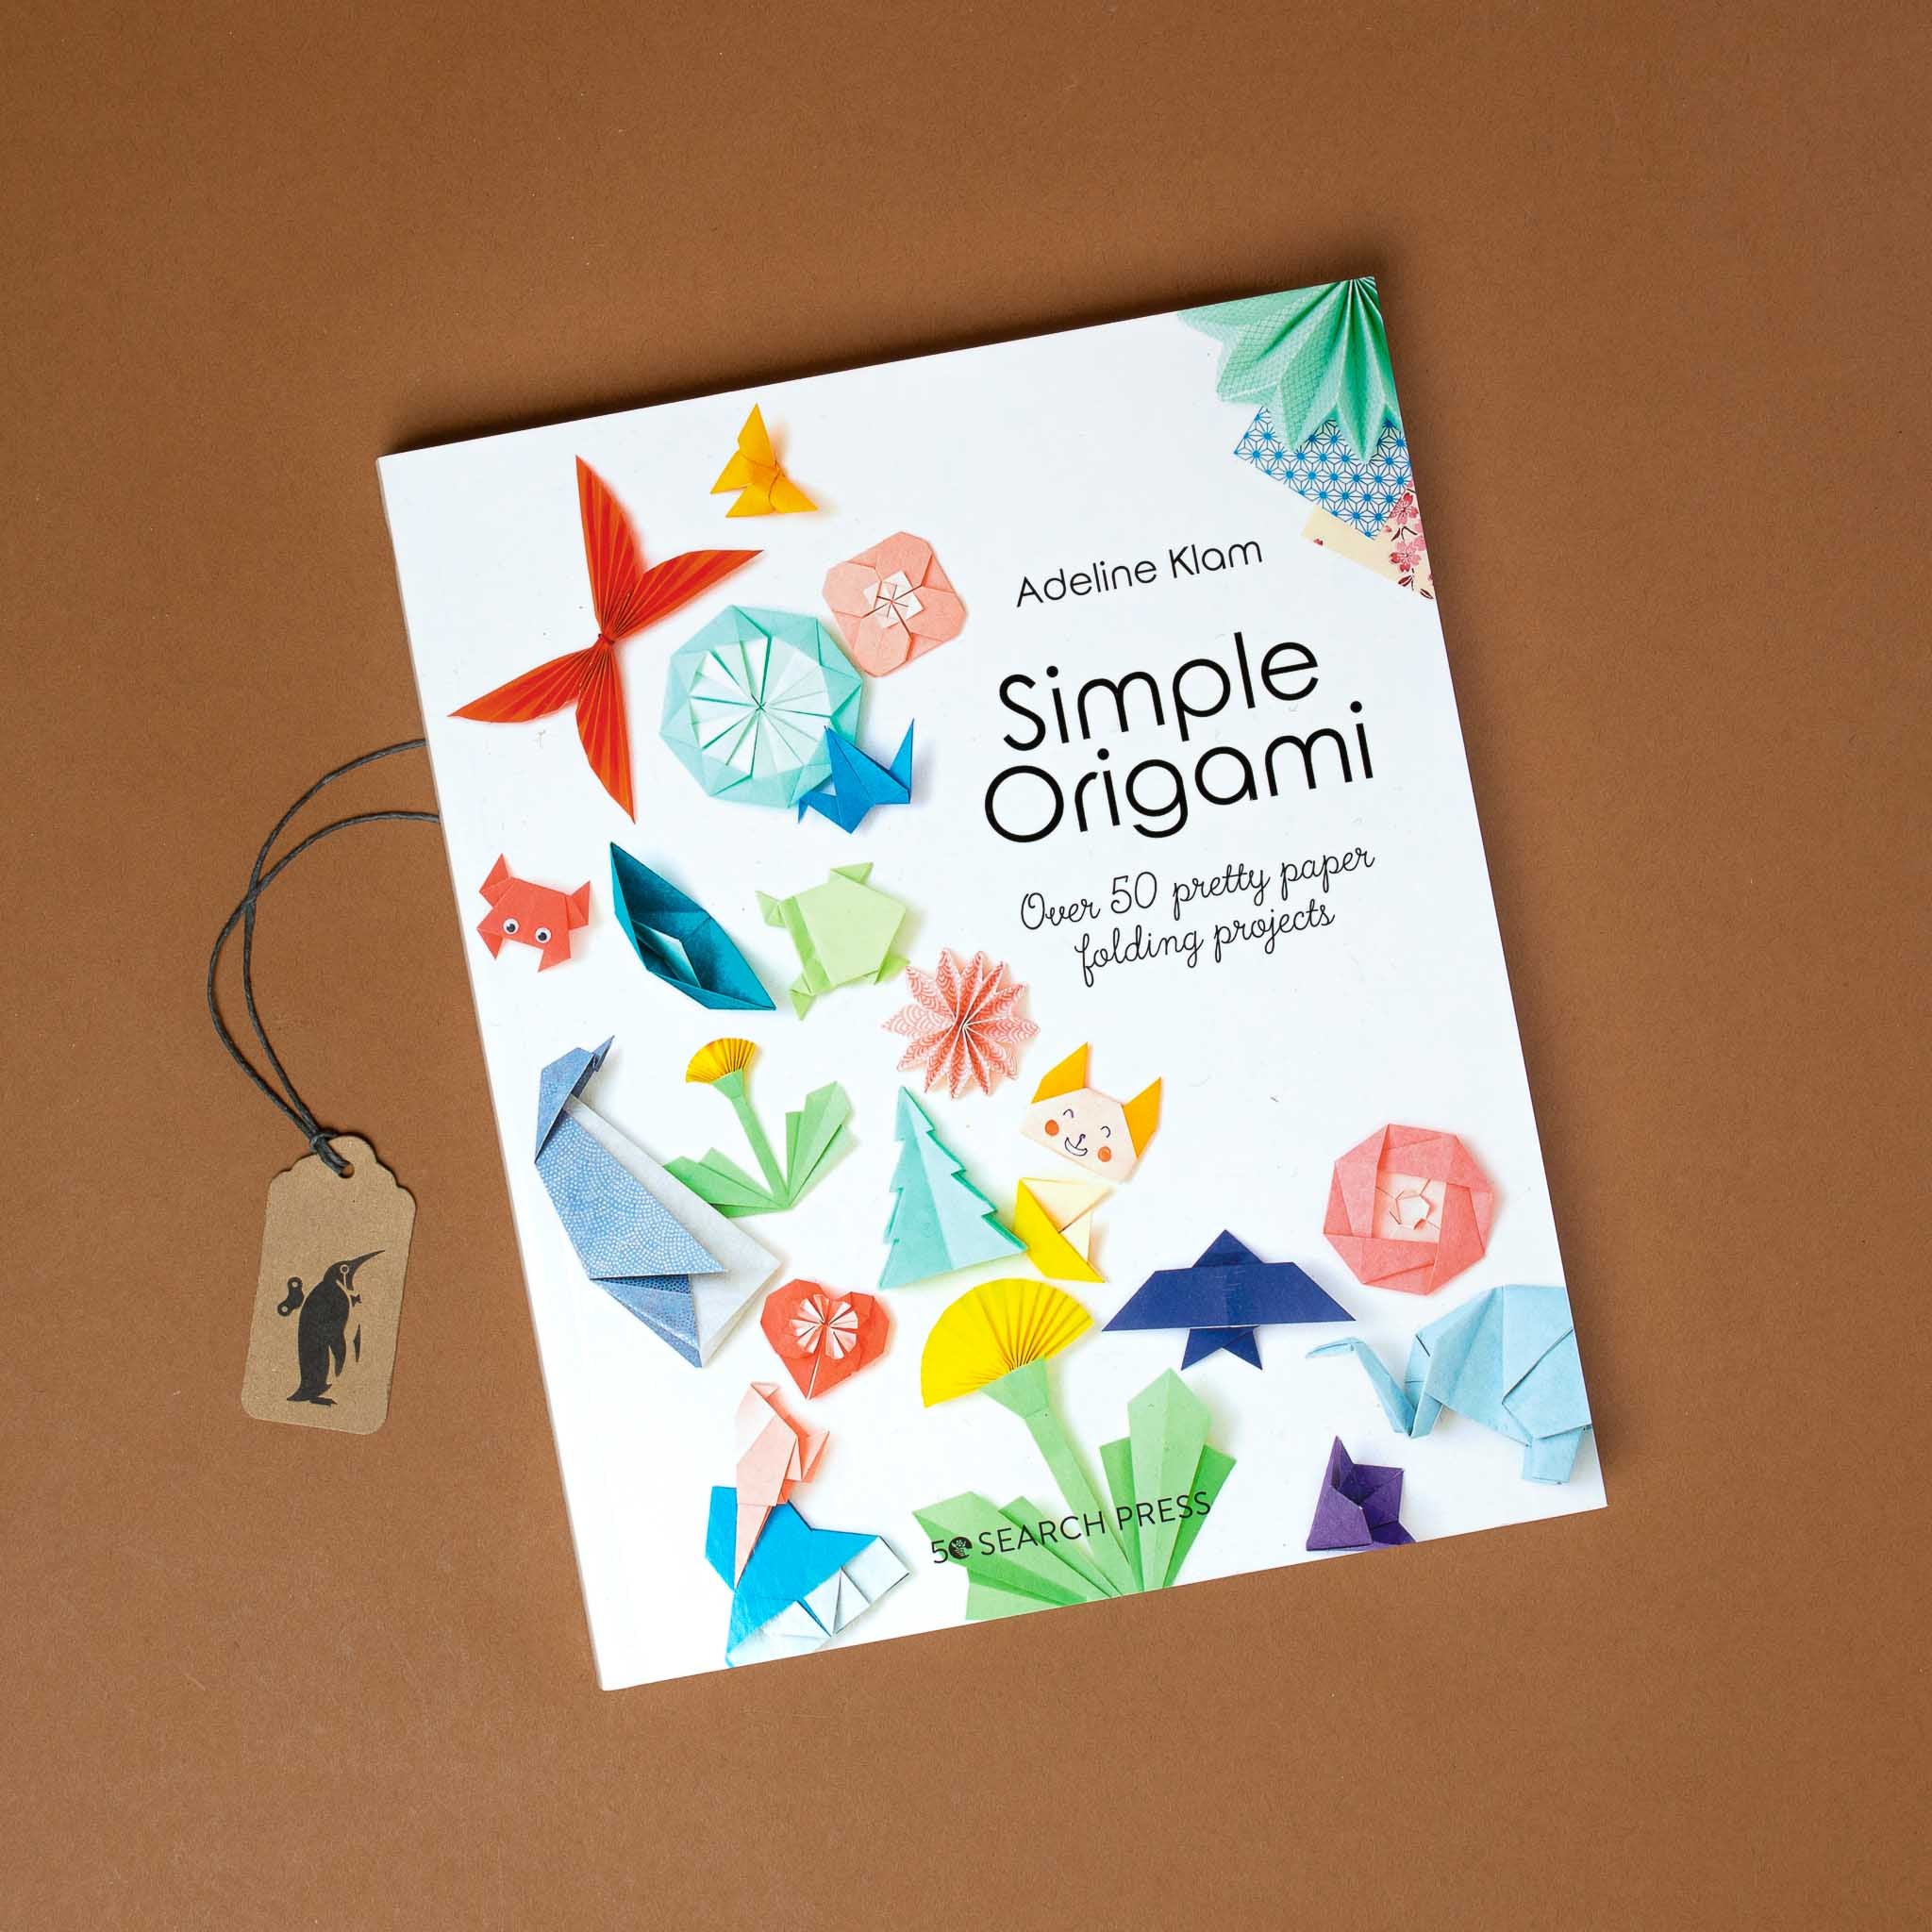 Origami Book: Cute and Easy Origami for Kids: Origami for